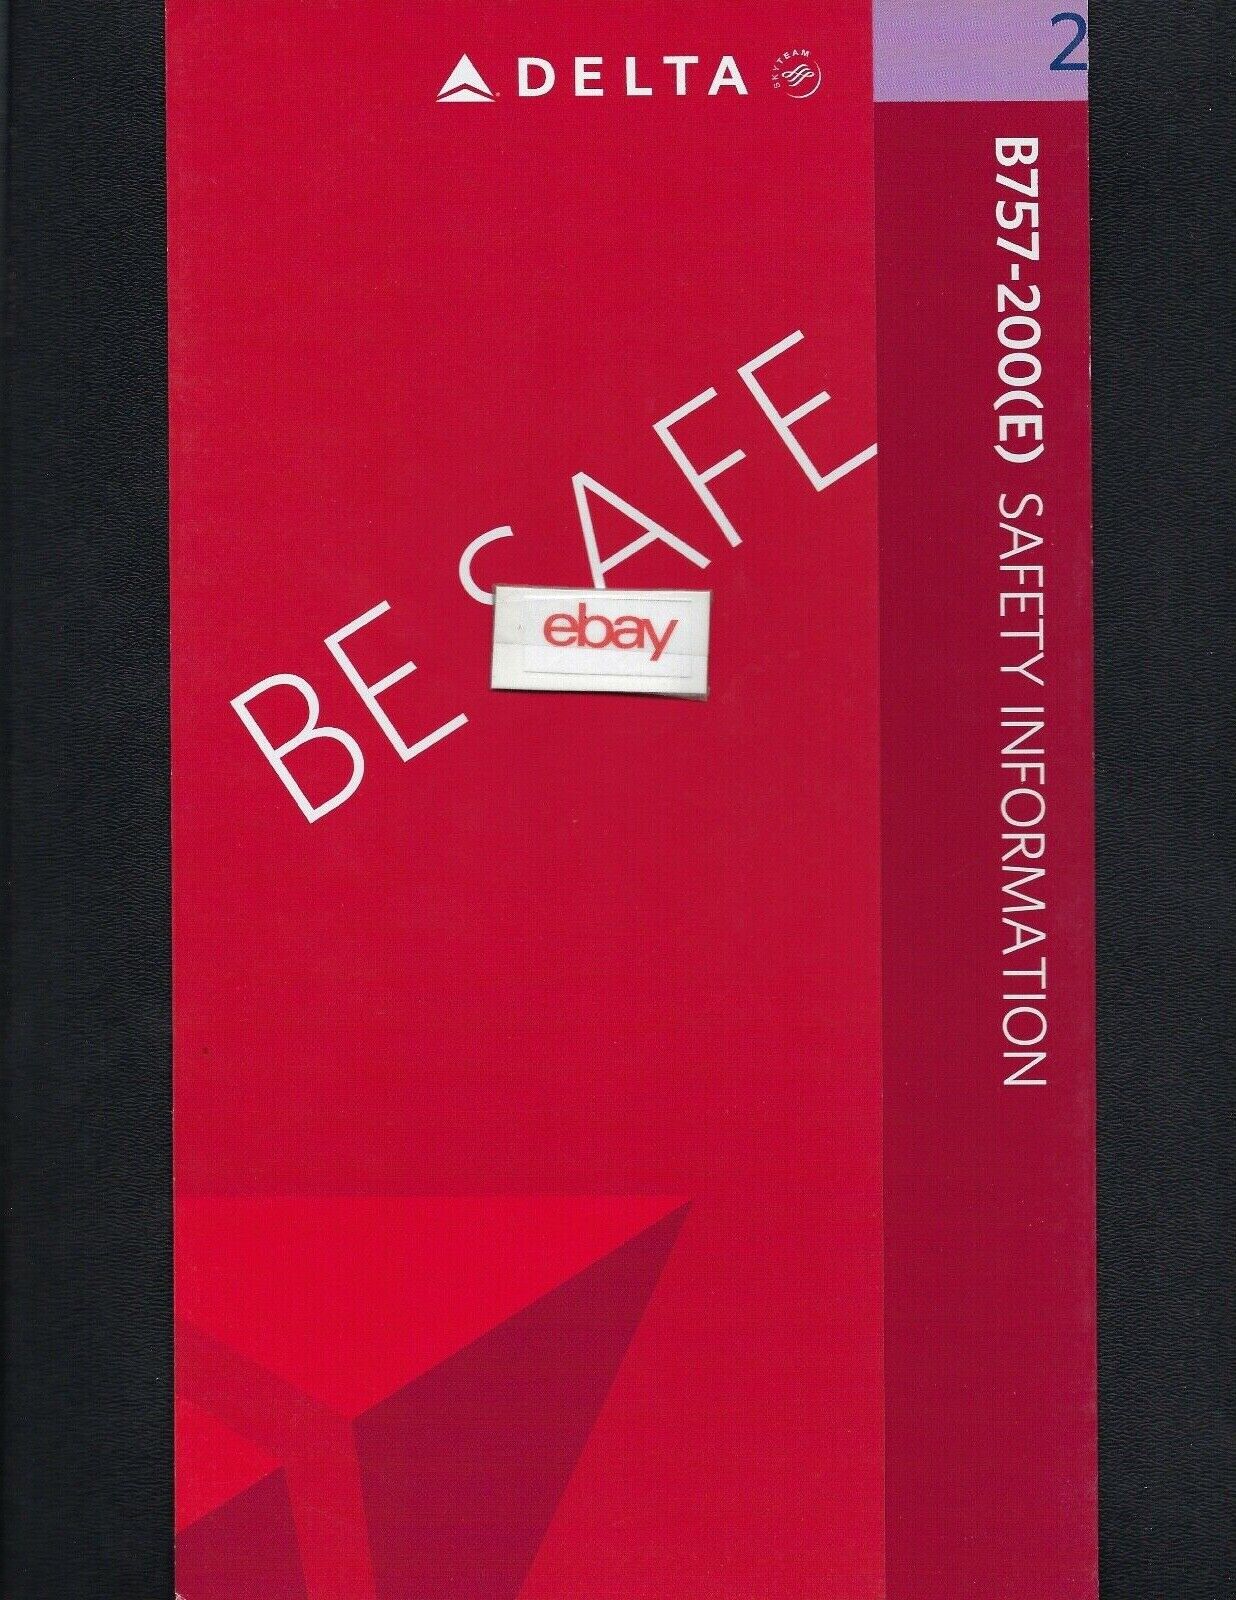 DELTA AIRLINES BOEING 757-200 (E) SAFETY CARD 2009 BE SAFE